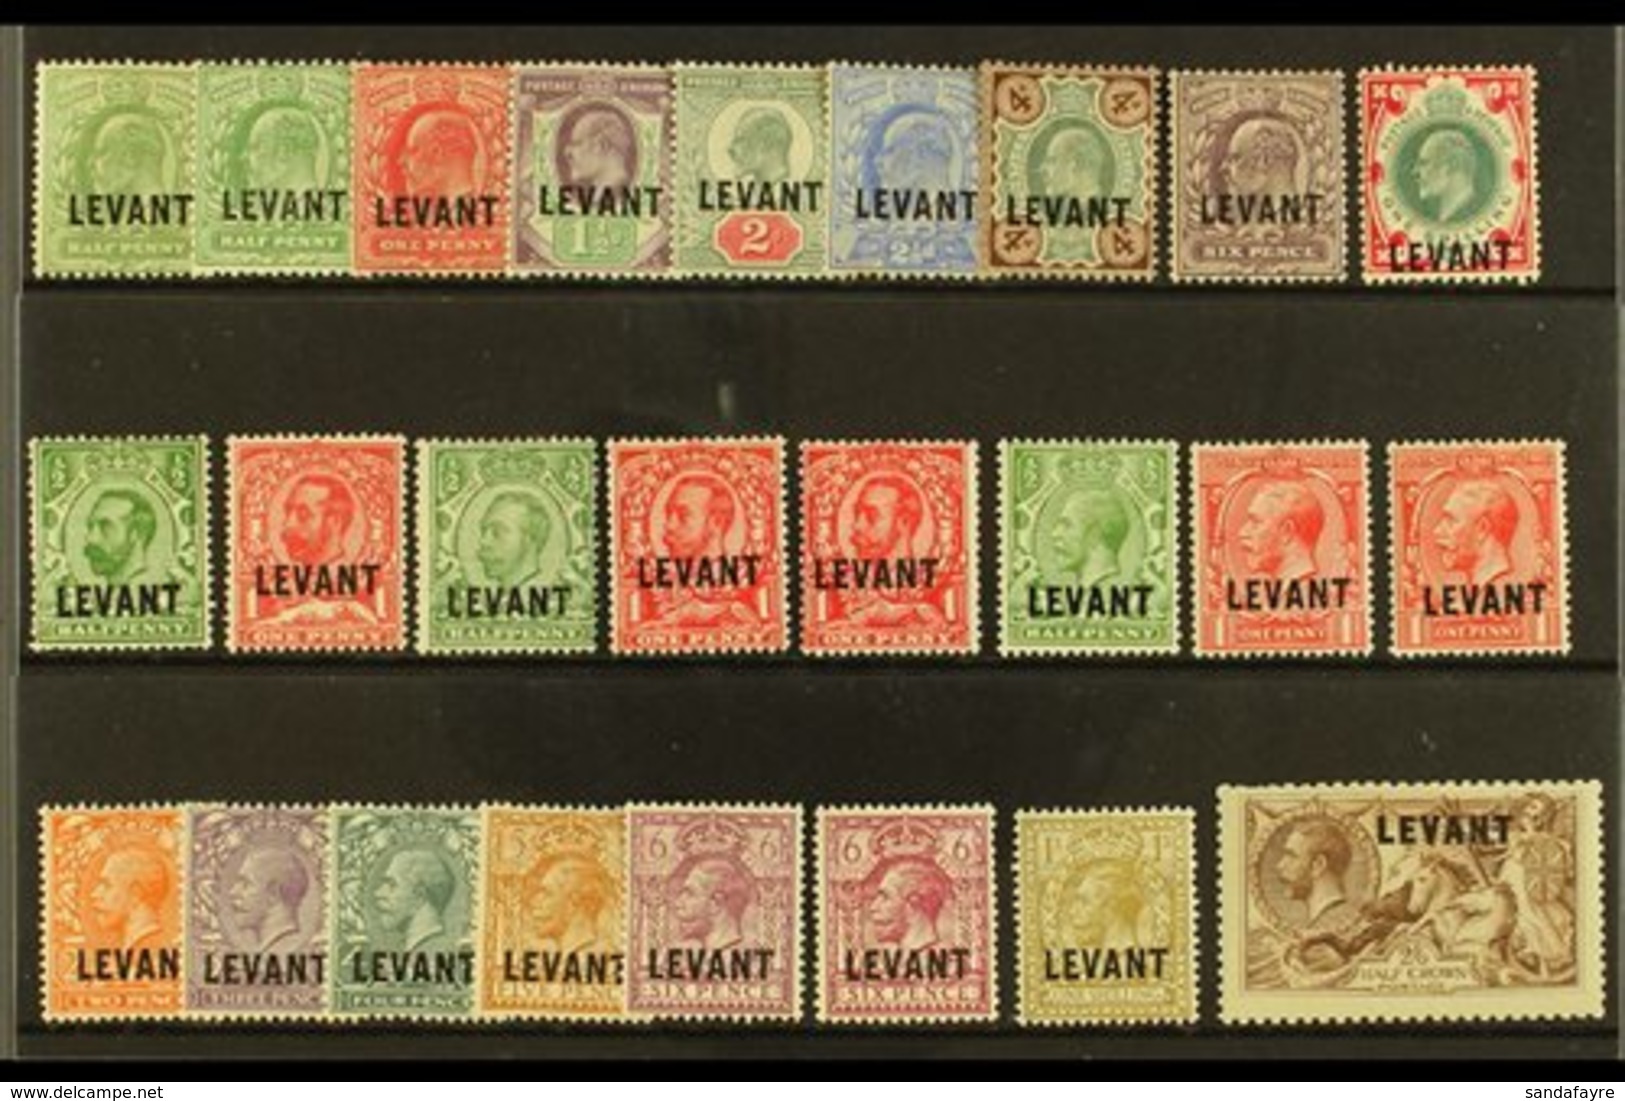 BRITISH CURRENCY 1905-21 MINT COLLECTION. An Attractive, All Different Mint "LEVANT" Opt'd Group That Includes 1905-12 R - Levant Britannique